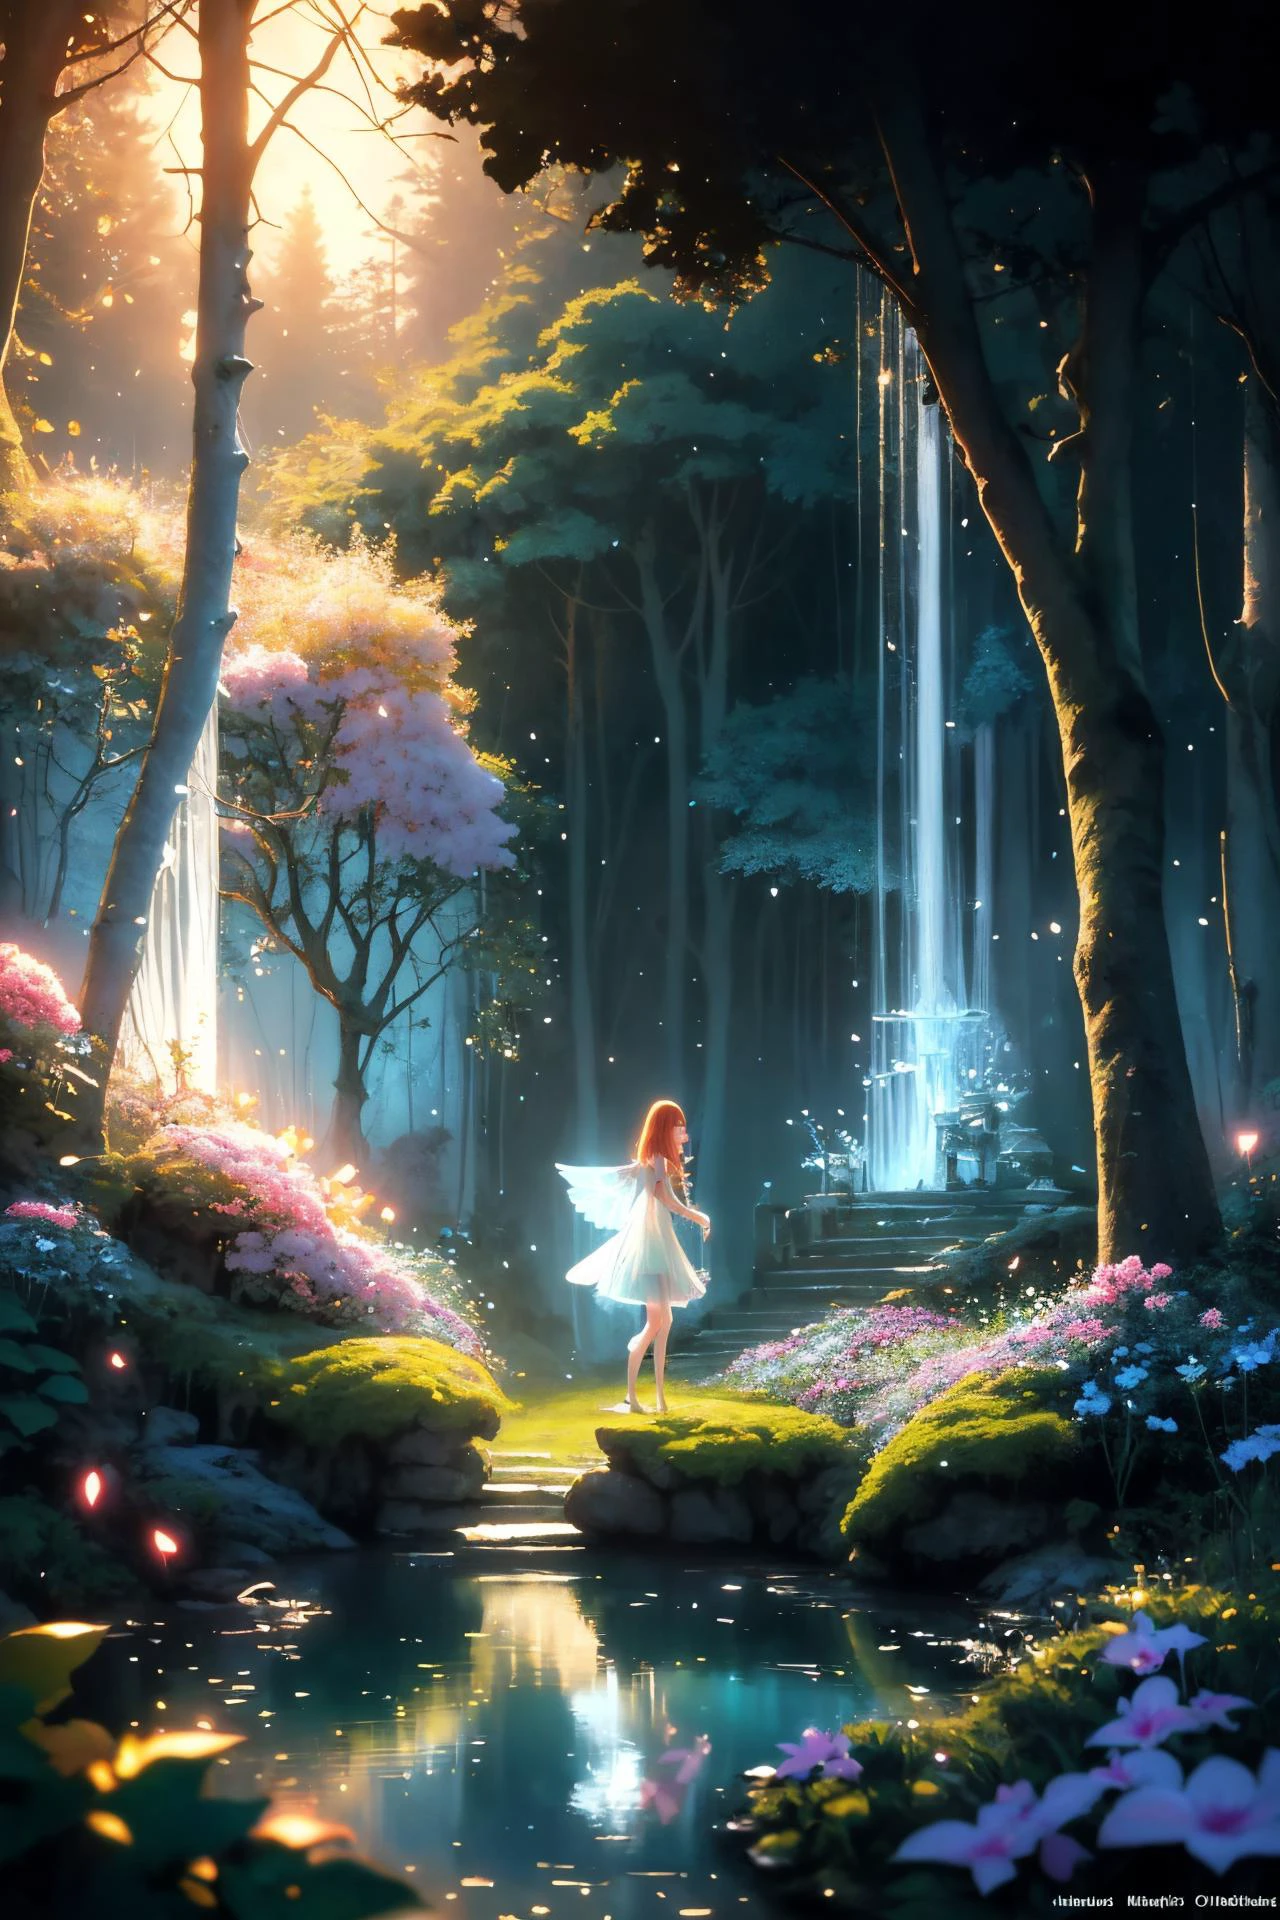 ( detailed realistic background:1),
( official art, beautiful and aesthetic:1 ),
realistic lighting,
cinematic lighting,
hyperrealism,
soothing tones,
muted colors,
high contrast,
soft light,
sharp,
artistic photoshoot,
FeyFa, , forest, trees, middle, path, waterfall, through, background, stream, flowers, lights, running, in the foreground stands a fairy in front of her fairy house, light,( cute,  ),
slender,
european,
pale cheeks,
square face shape with angular jaw,
natural "no-makeup" makeup,
big breasts,
,
ginger hair ,
asymmetric cut hair  ,wearing a see-through gossamer fairy short dress,
night time, darkness,